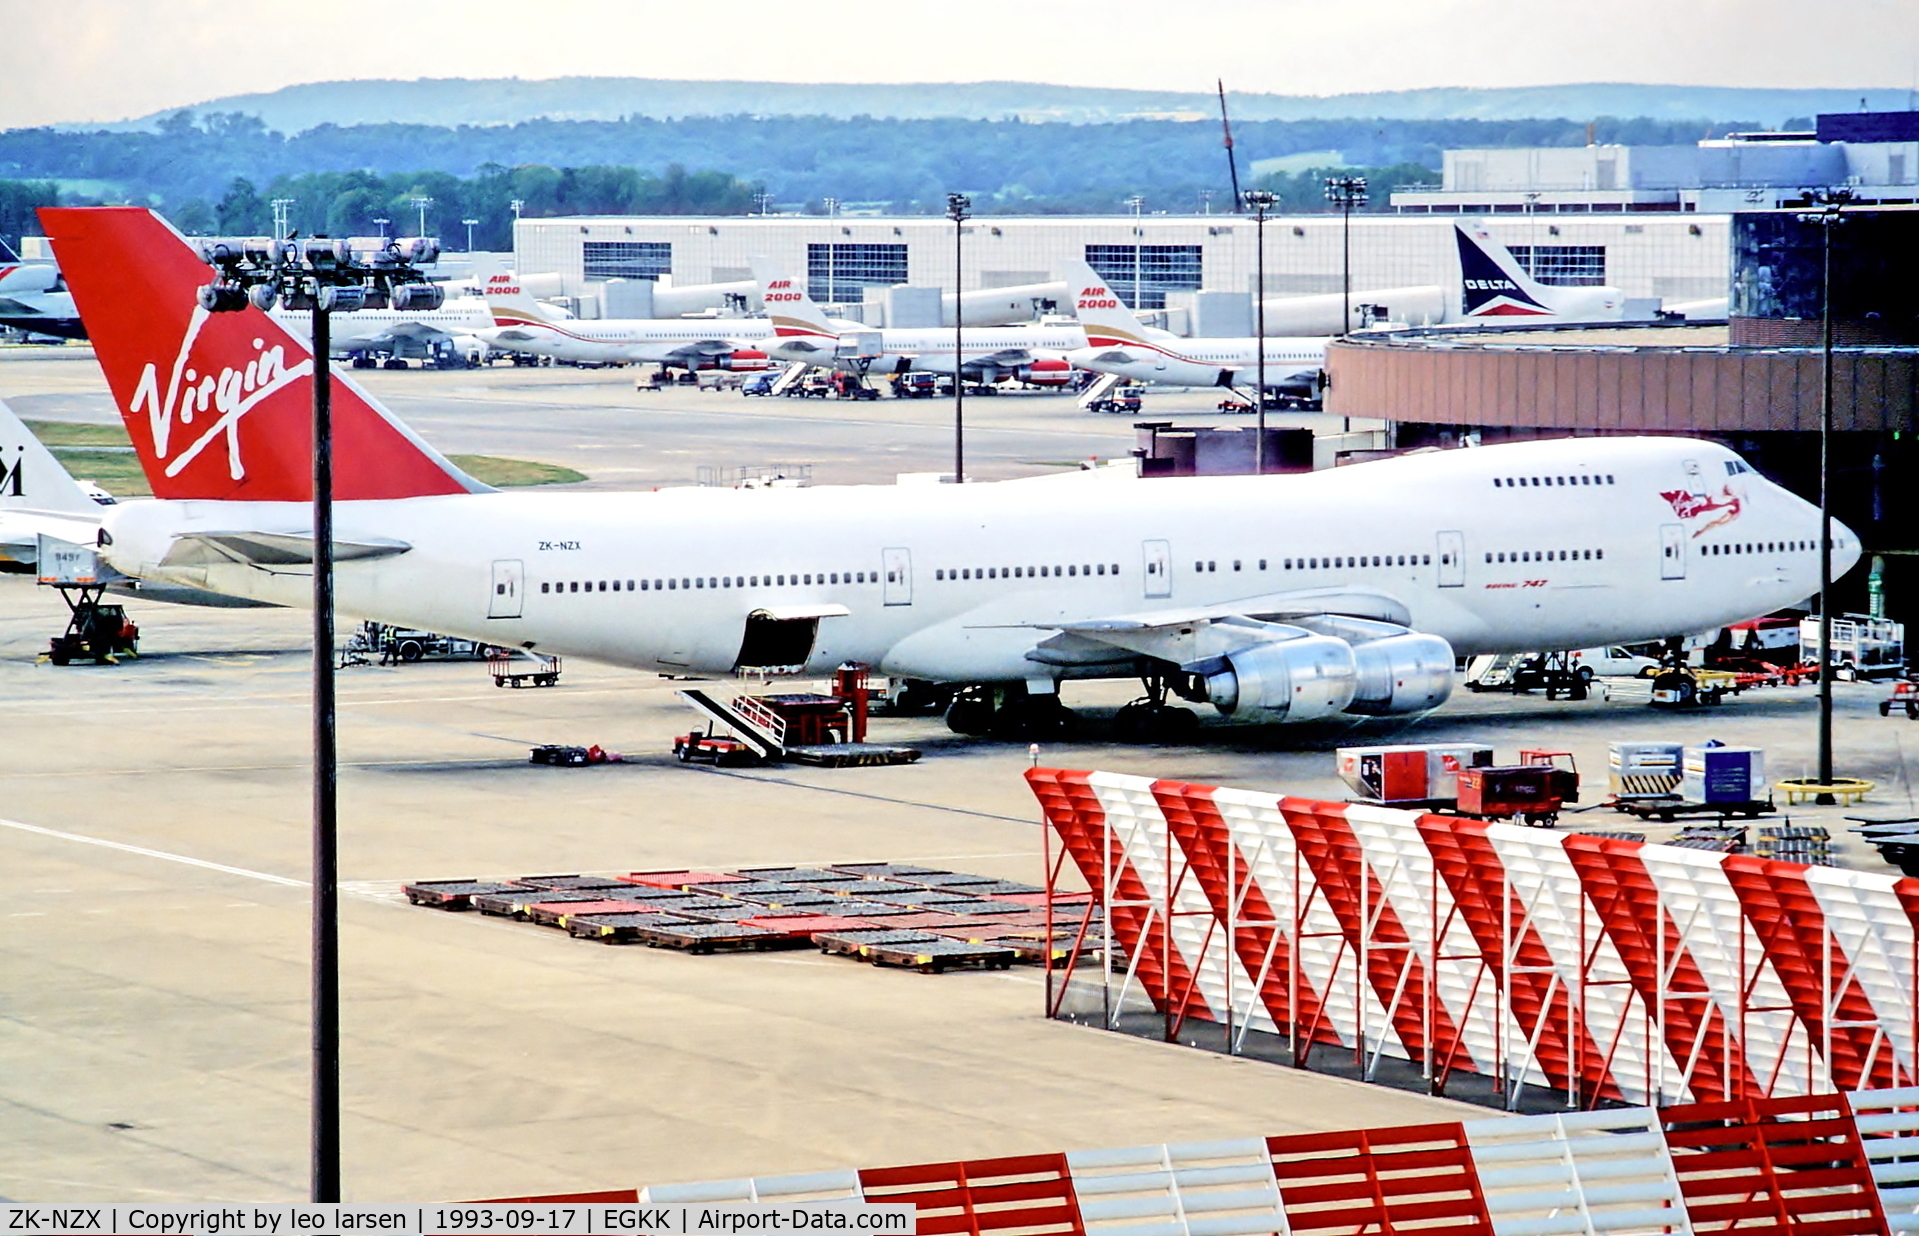 ZK-NZX, 1981 Boeing 747-219B C/N 22724, Gatwick LGW 17.9.93
ZK-NZX duing short lease to Virgin Atlantic